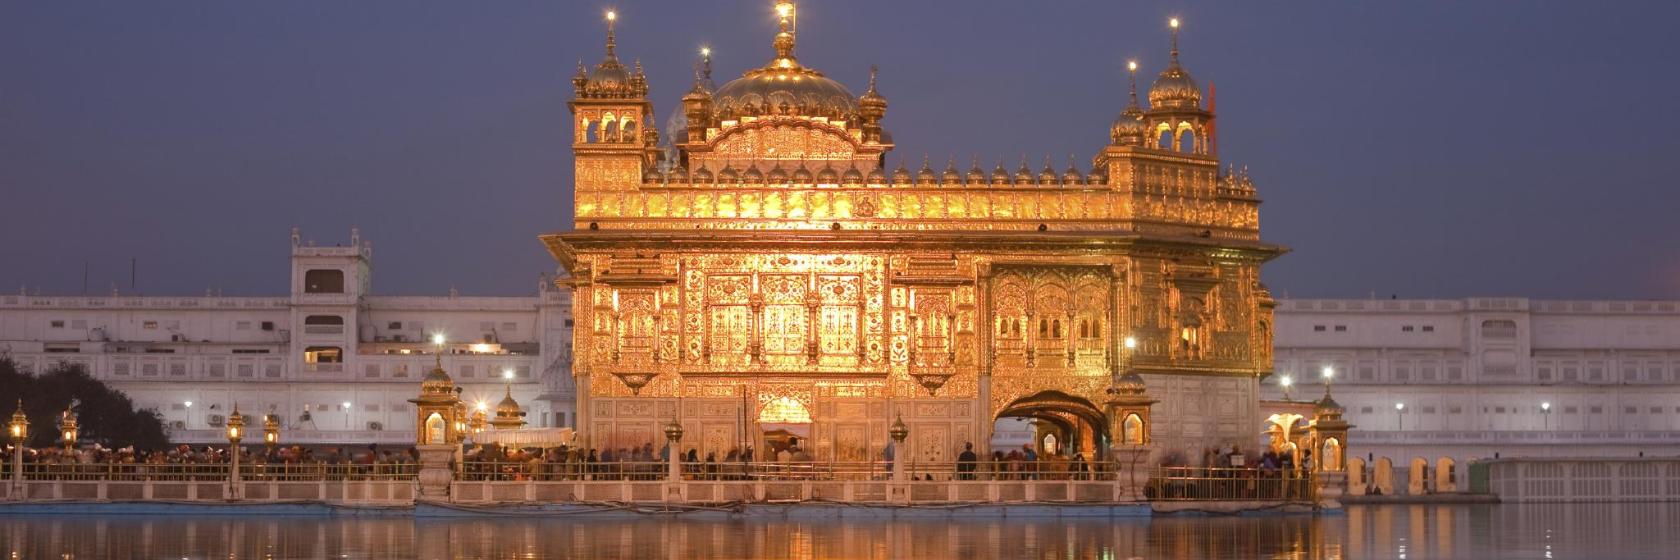 The 10 best hotels near Golden Temple in Amritsar, India